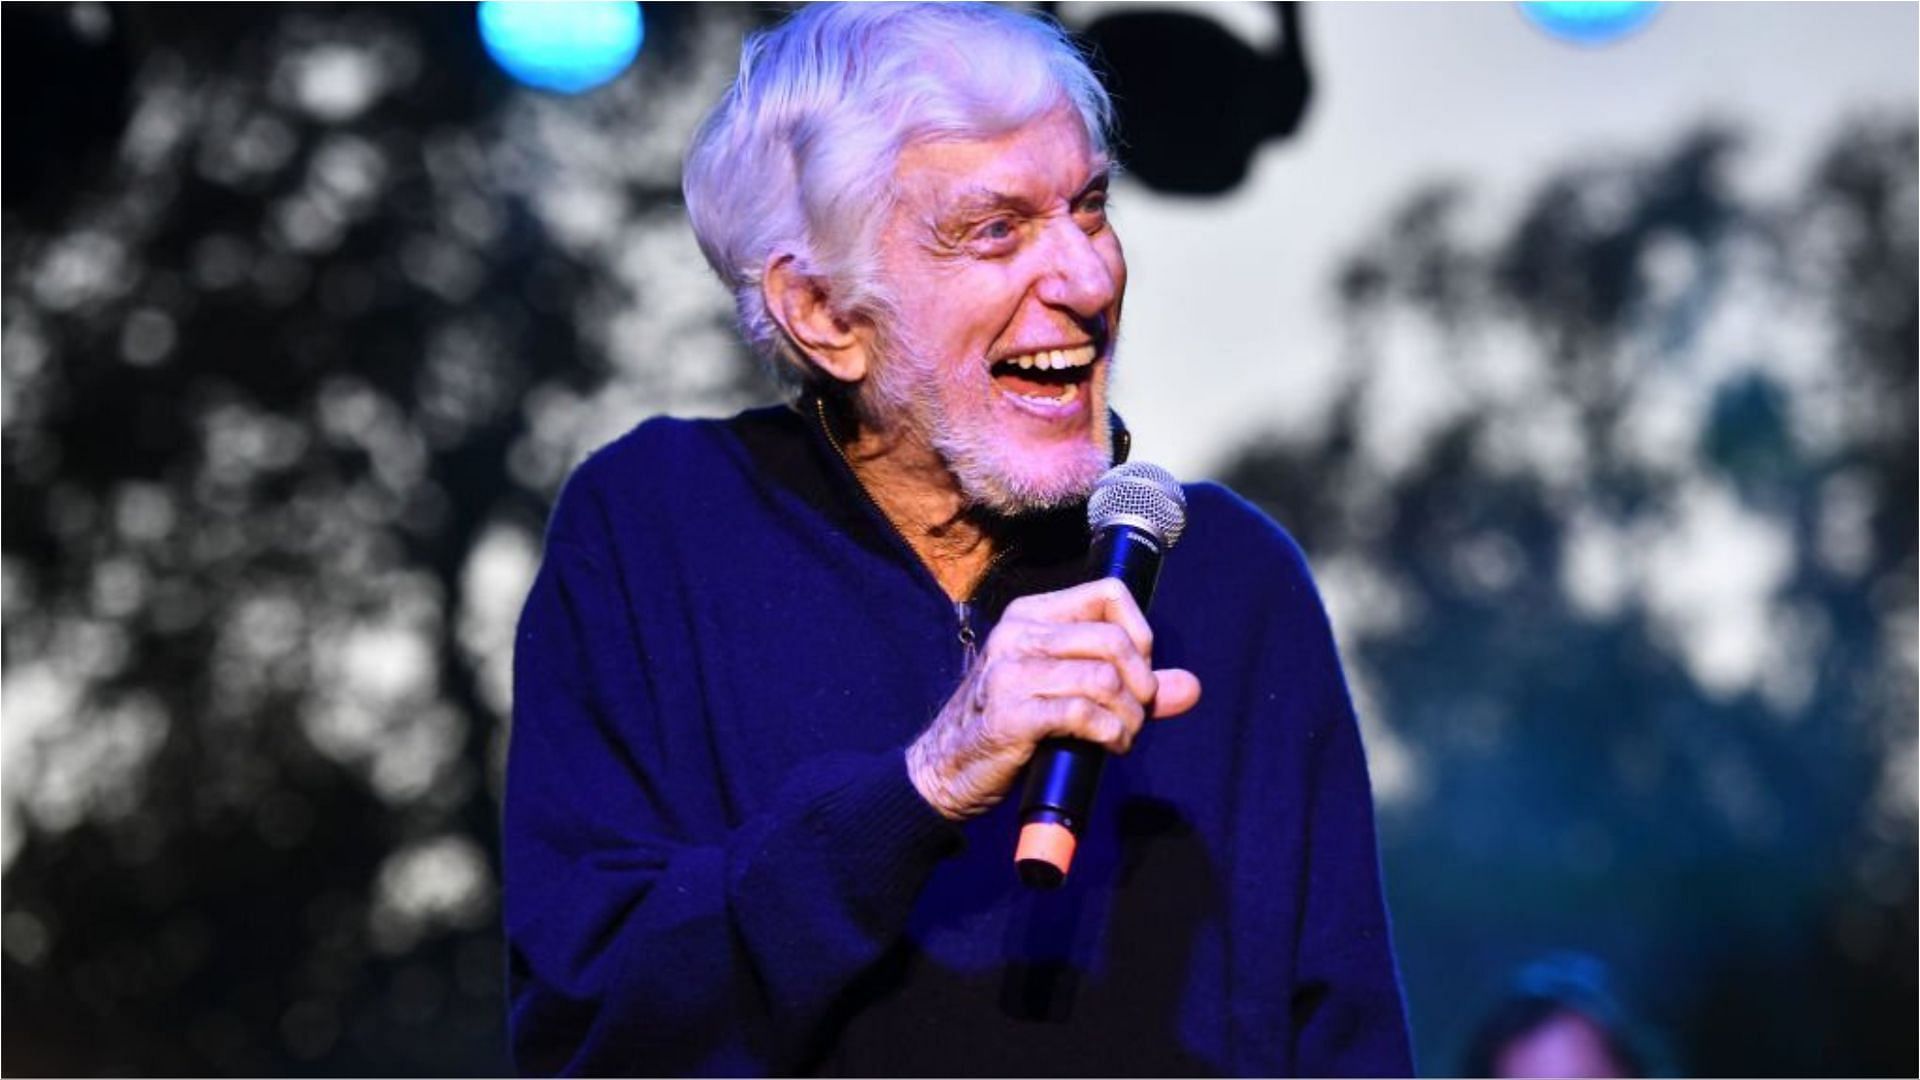 Dick Van Dyke surprised everyone with his appearance on The Masked Singer season 9 (Image via Scott Dudelson/Getty Images)